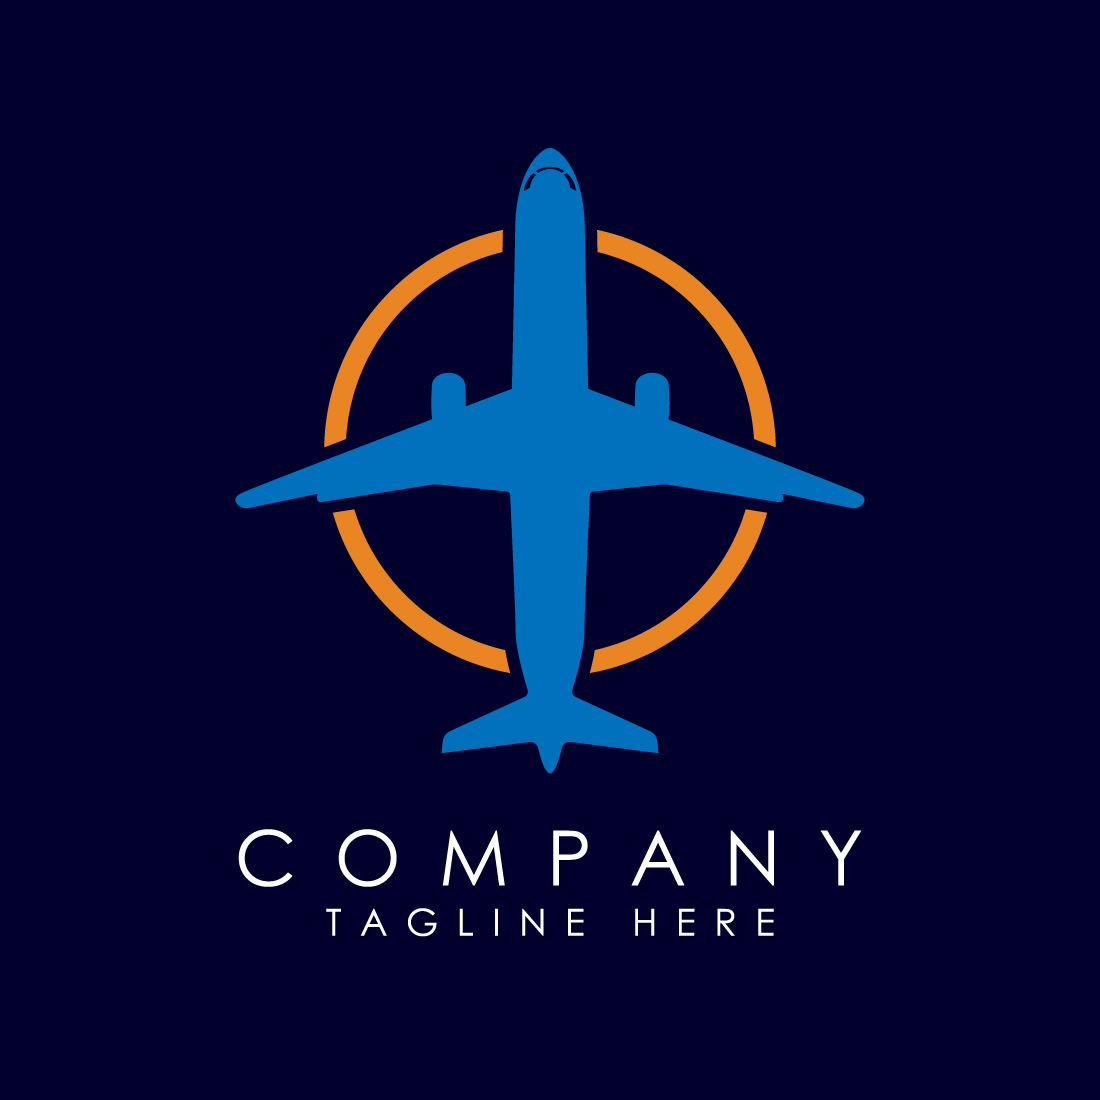 Airplane aviation vector logo design concept Airline logo plane travel icon Airport flight world aviation cover image.